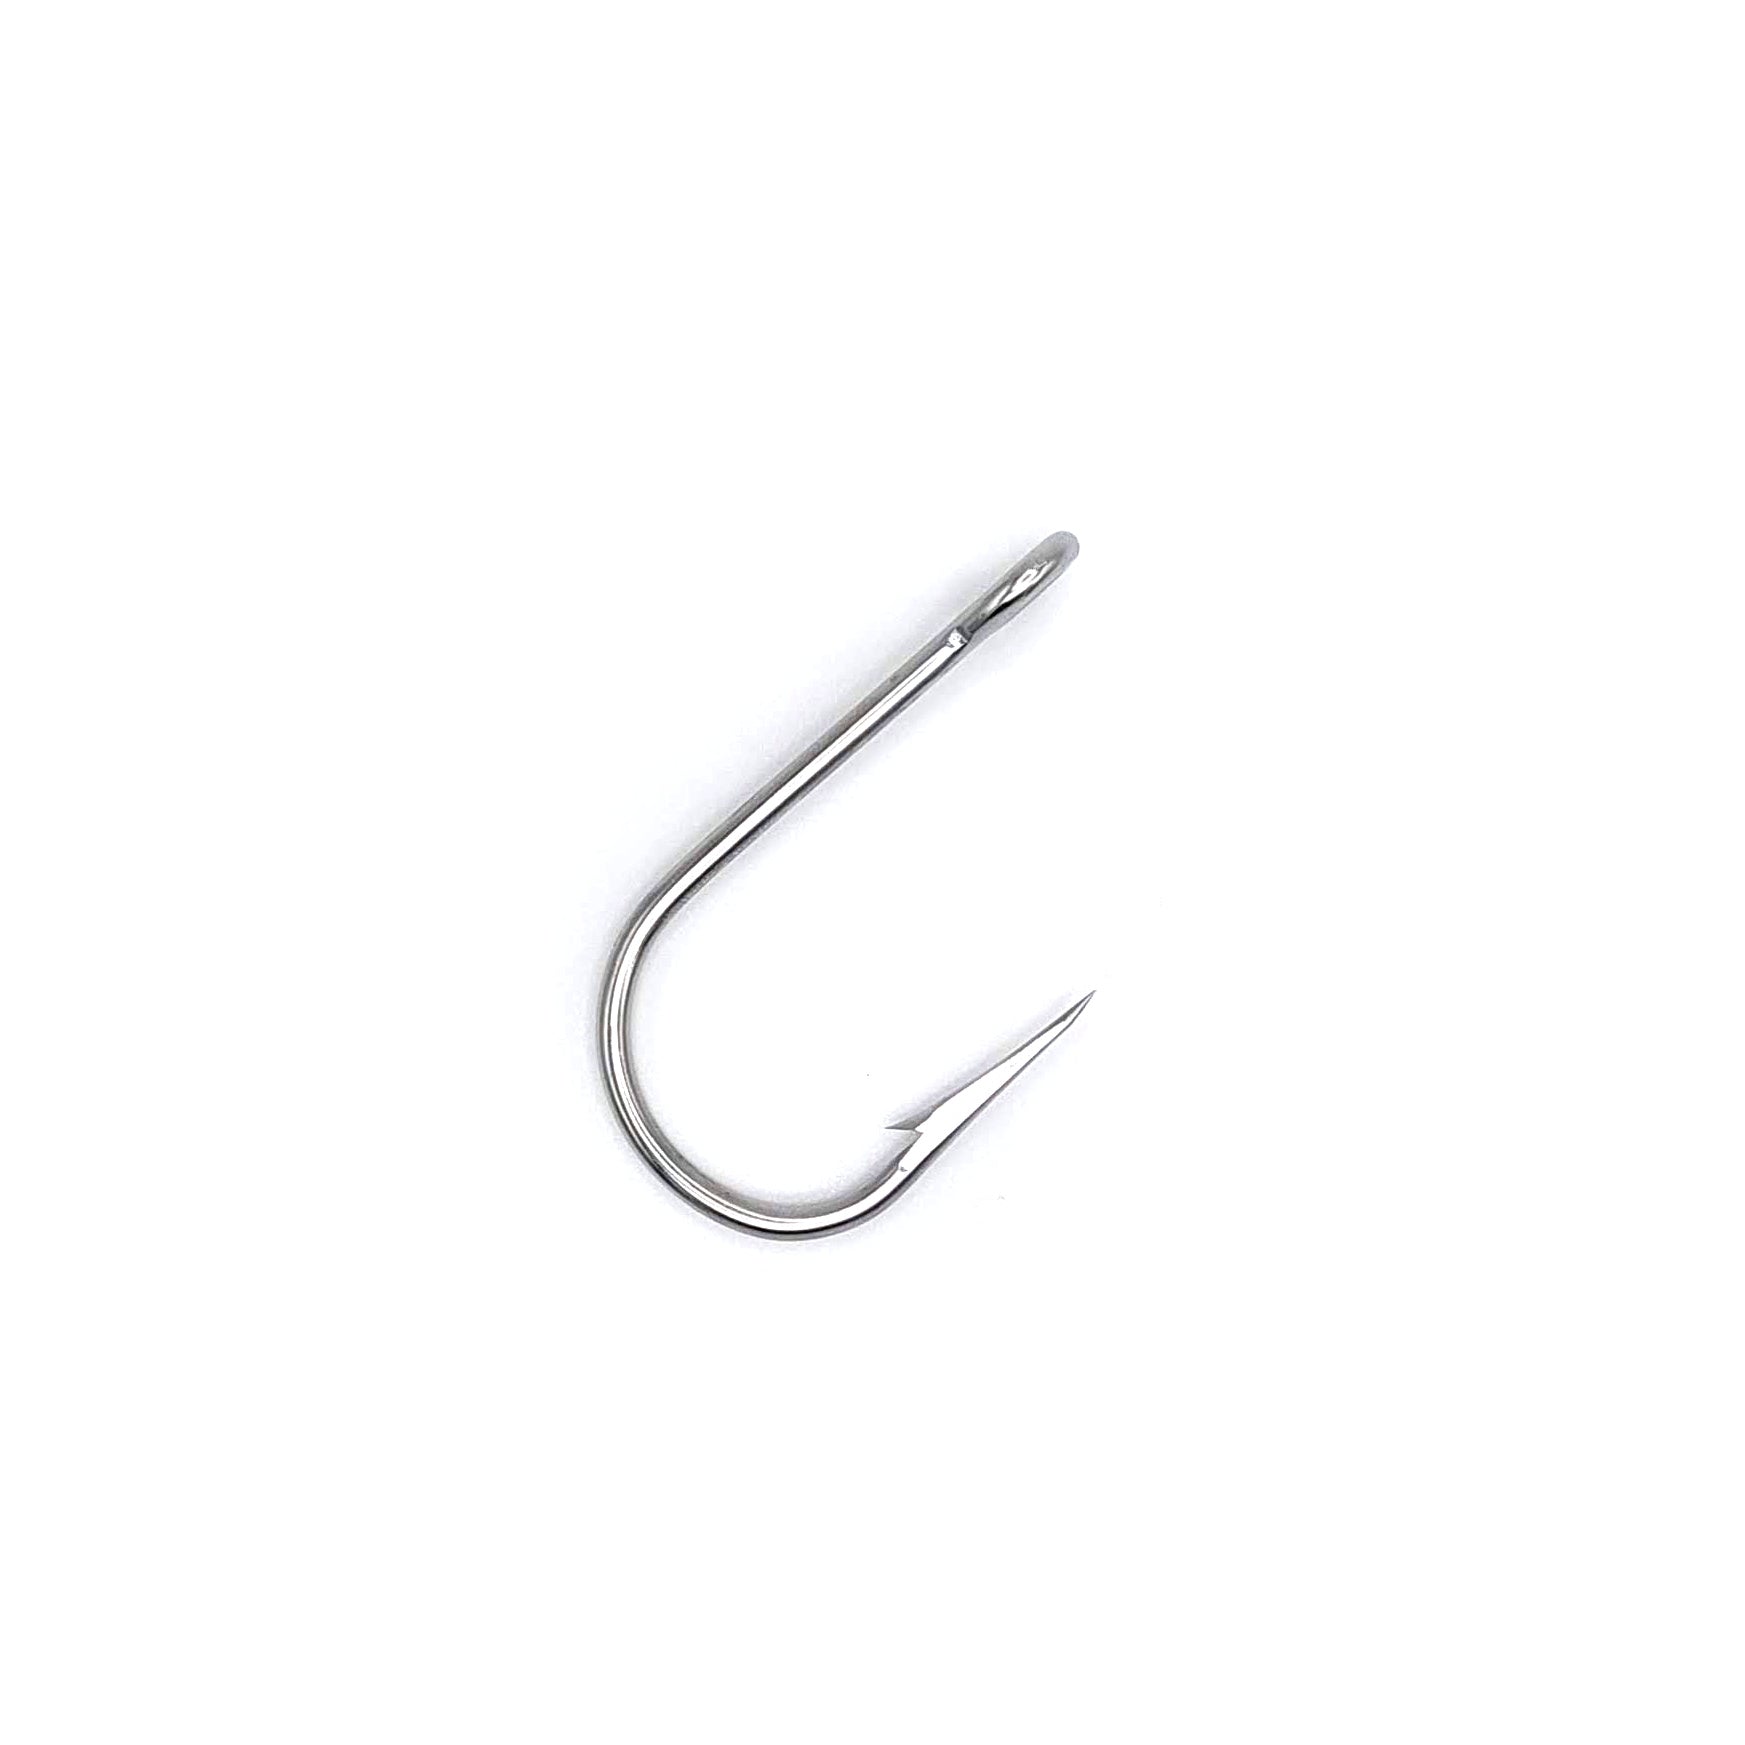 95160-SS Mustad Siwash Hook Stainless Steel 3X Strong - Evolution Lures